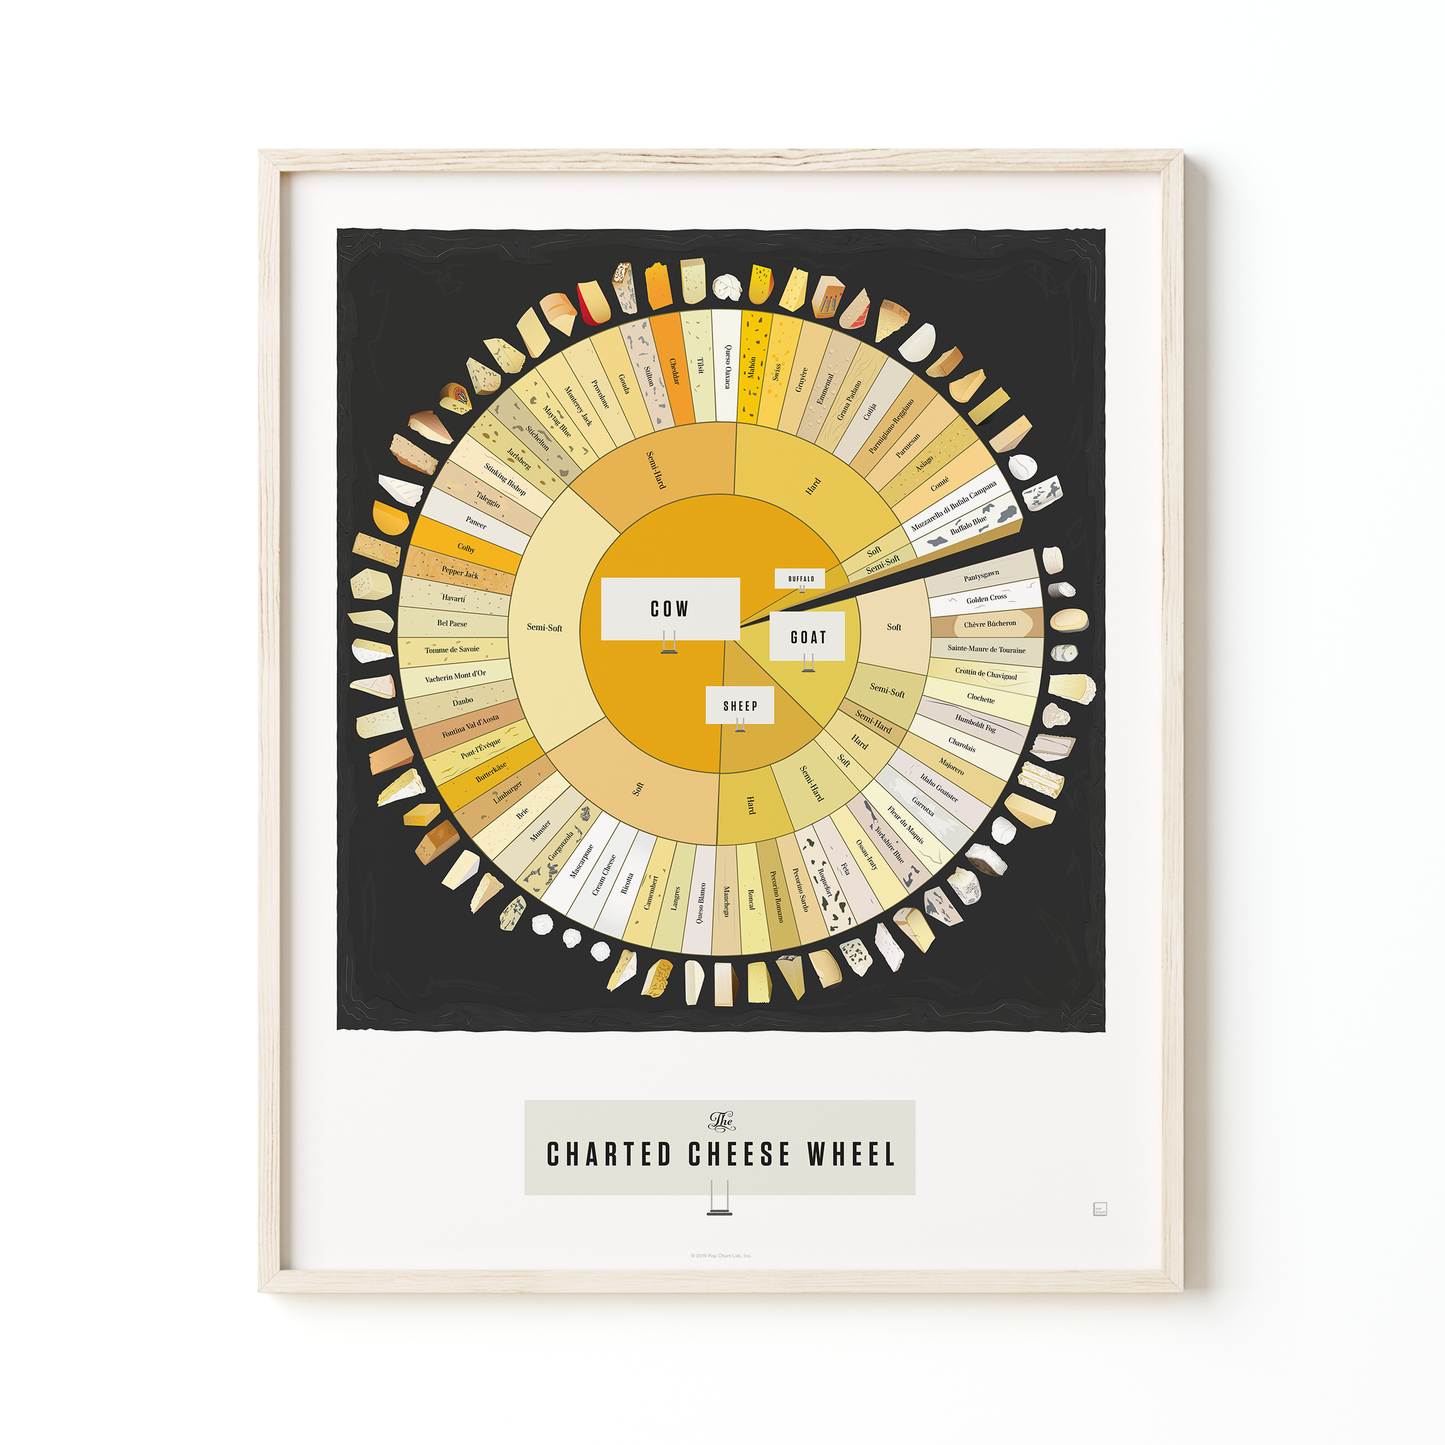 The Charted Cheese Wheel | 16" x 20" print